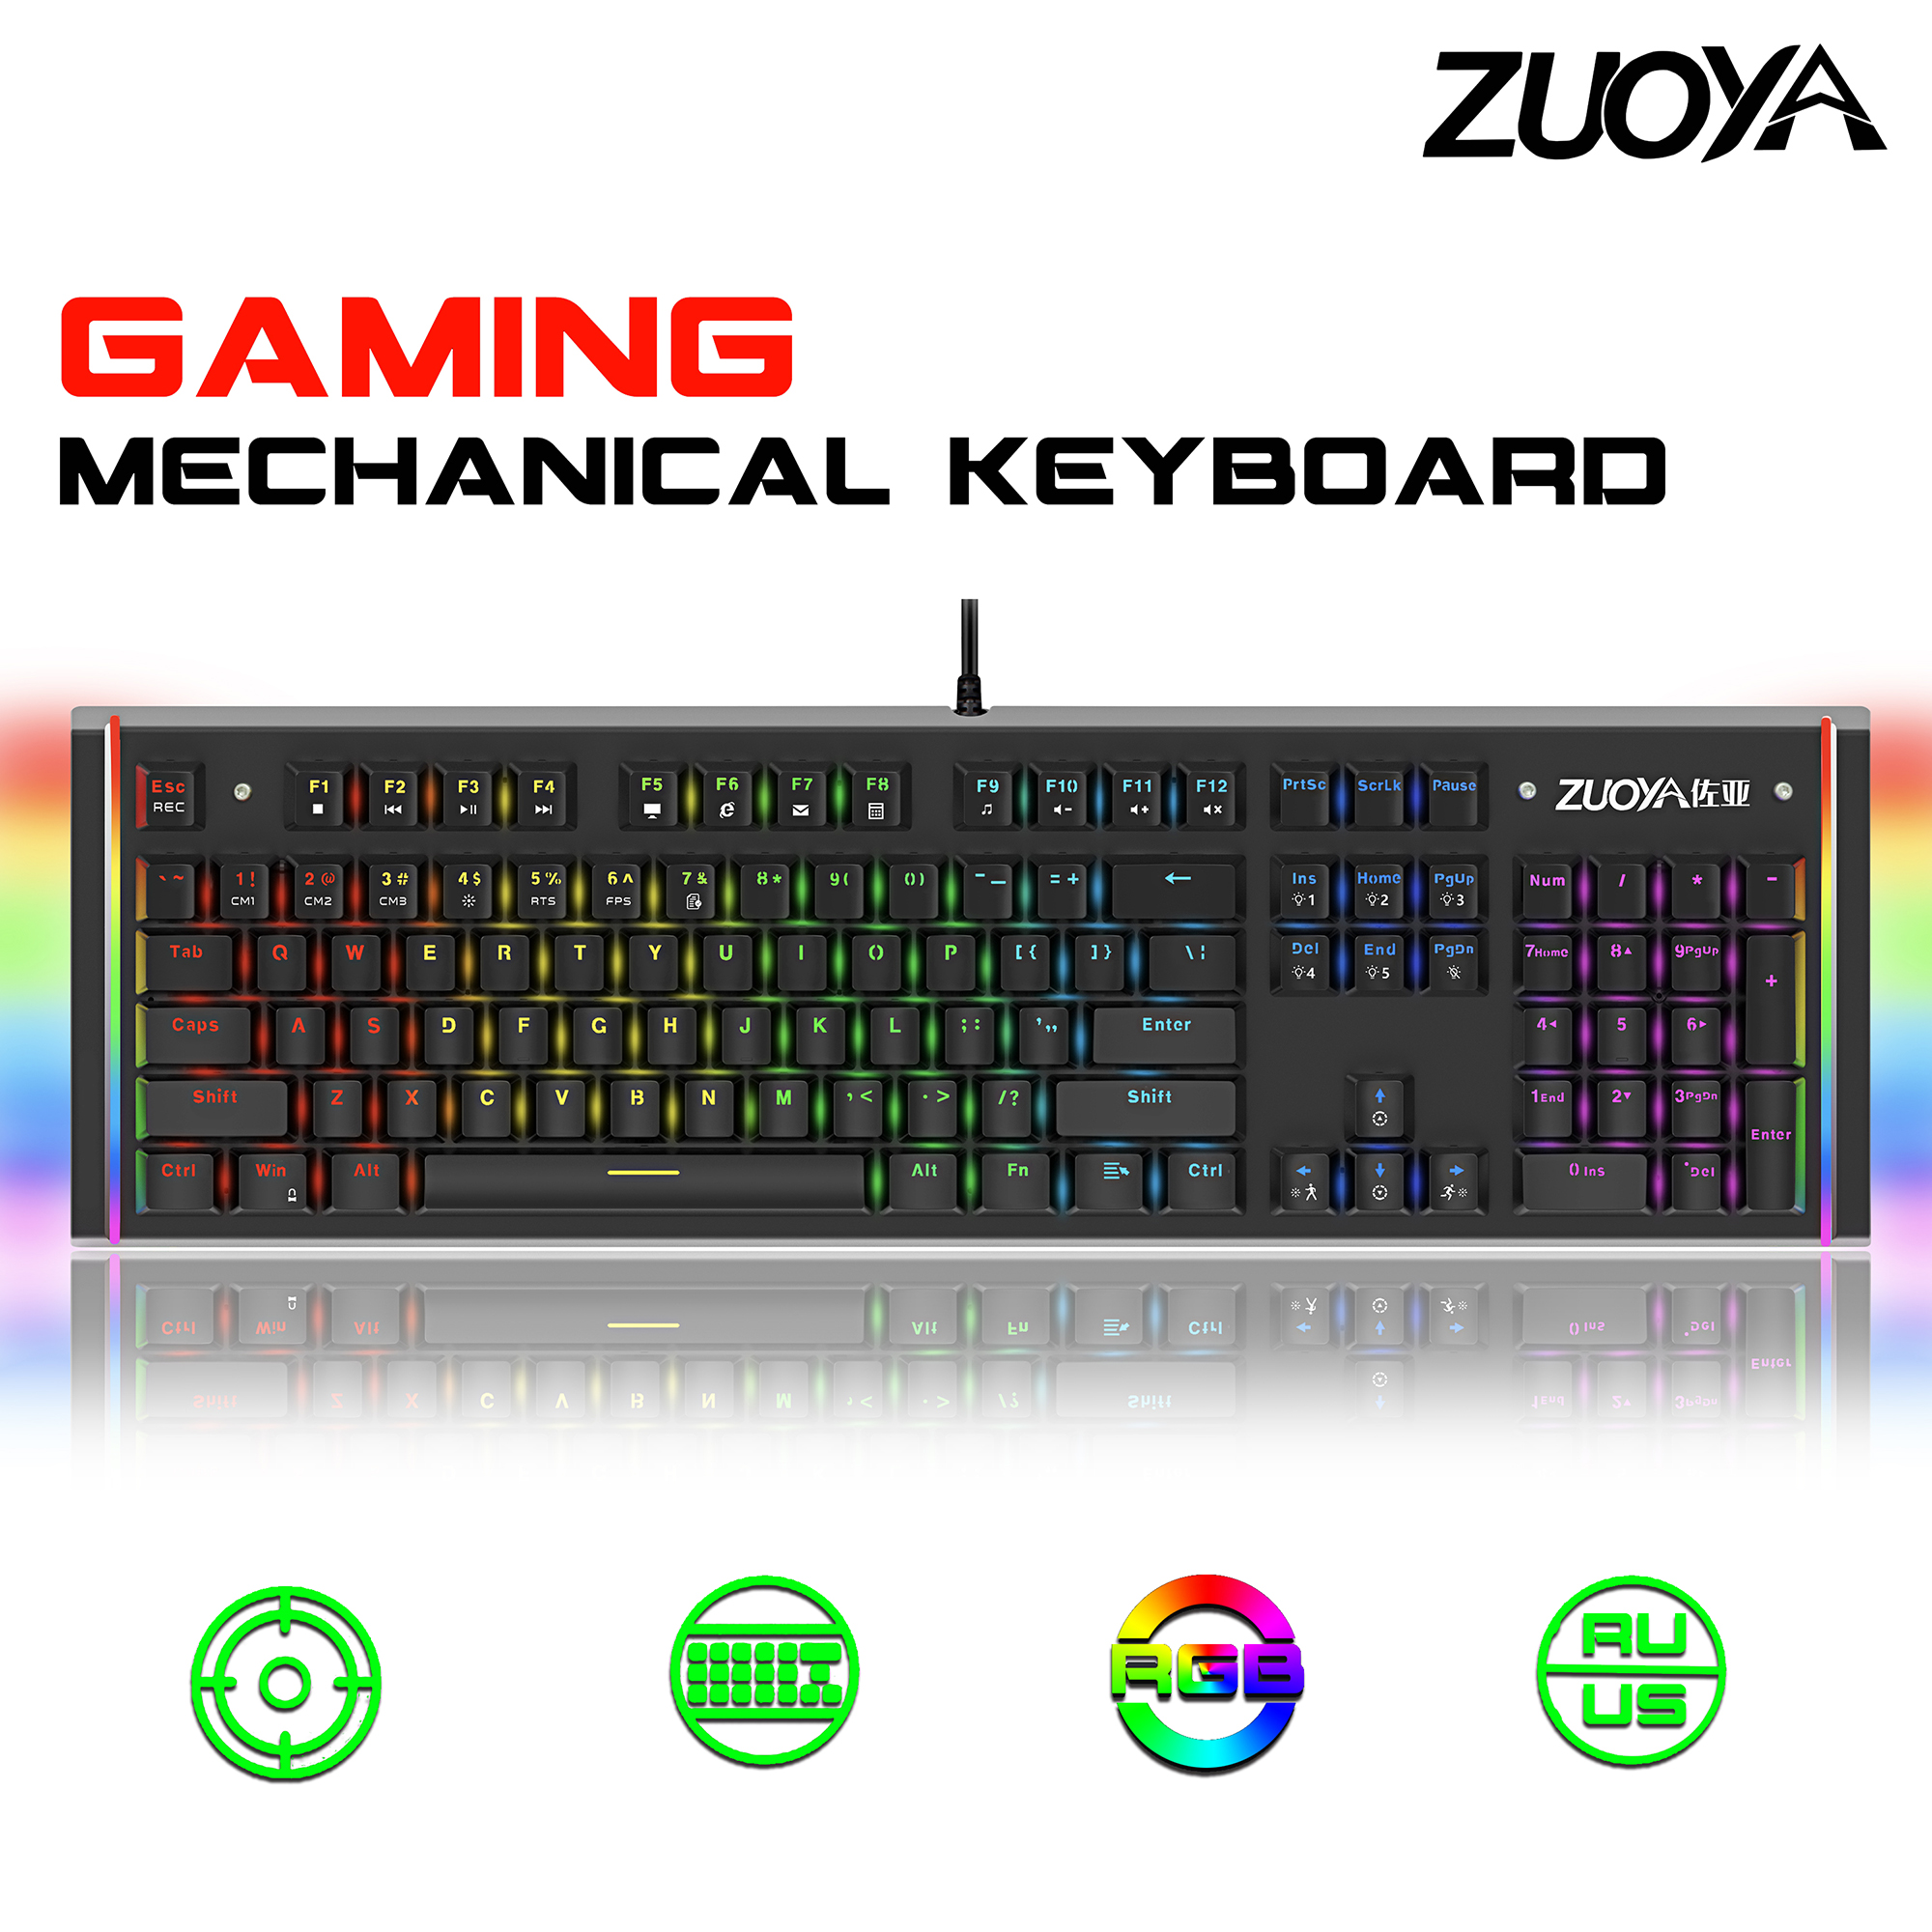 ZUOYA X61 Wired Gaming Mechanical Keyboard RGB Mix Backlit Keyboard Anti-ghosting Blue Red Switch For Game Laptop PC Russian US